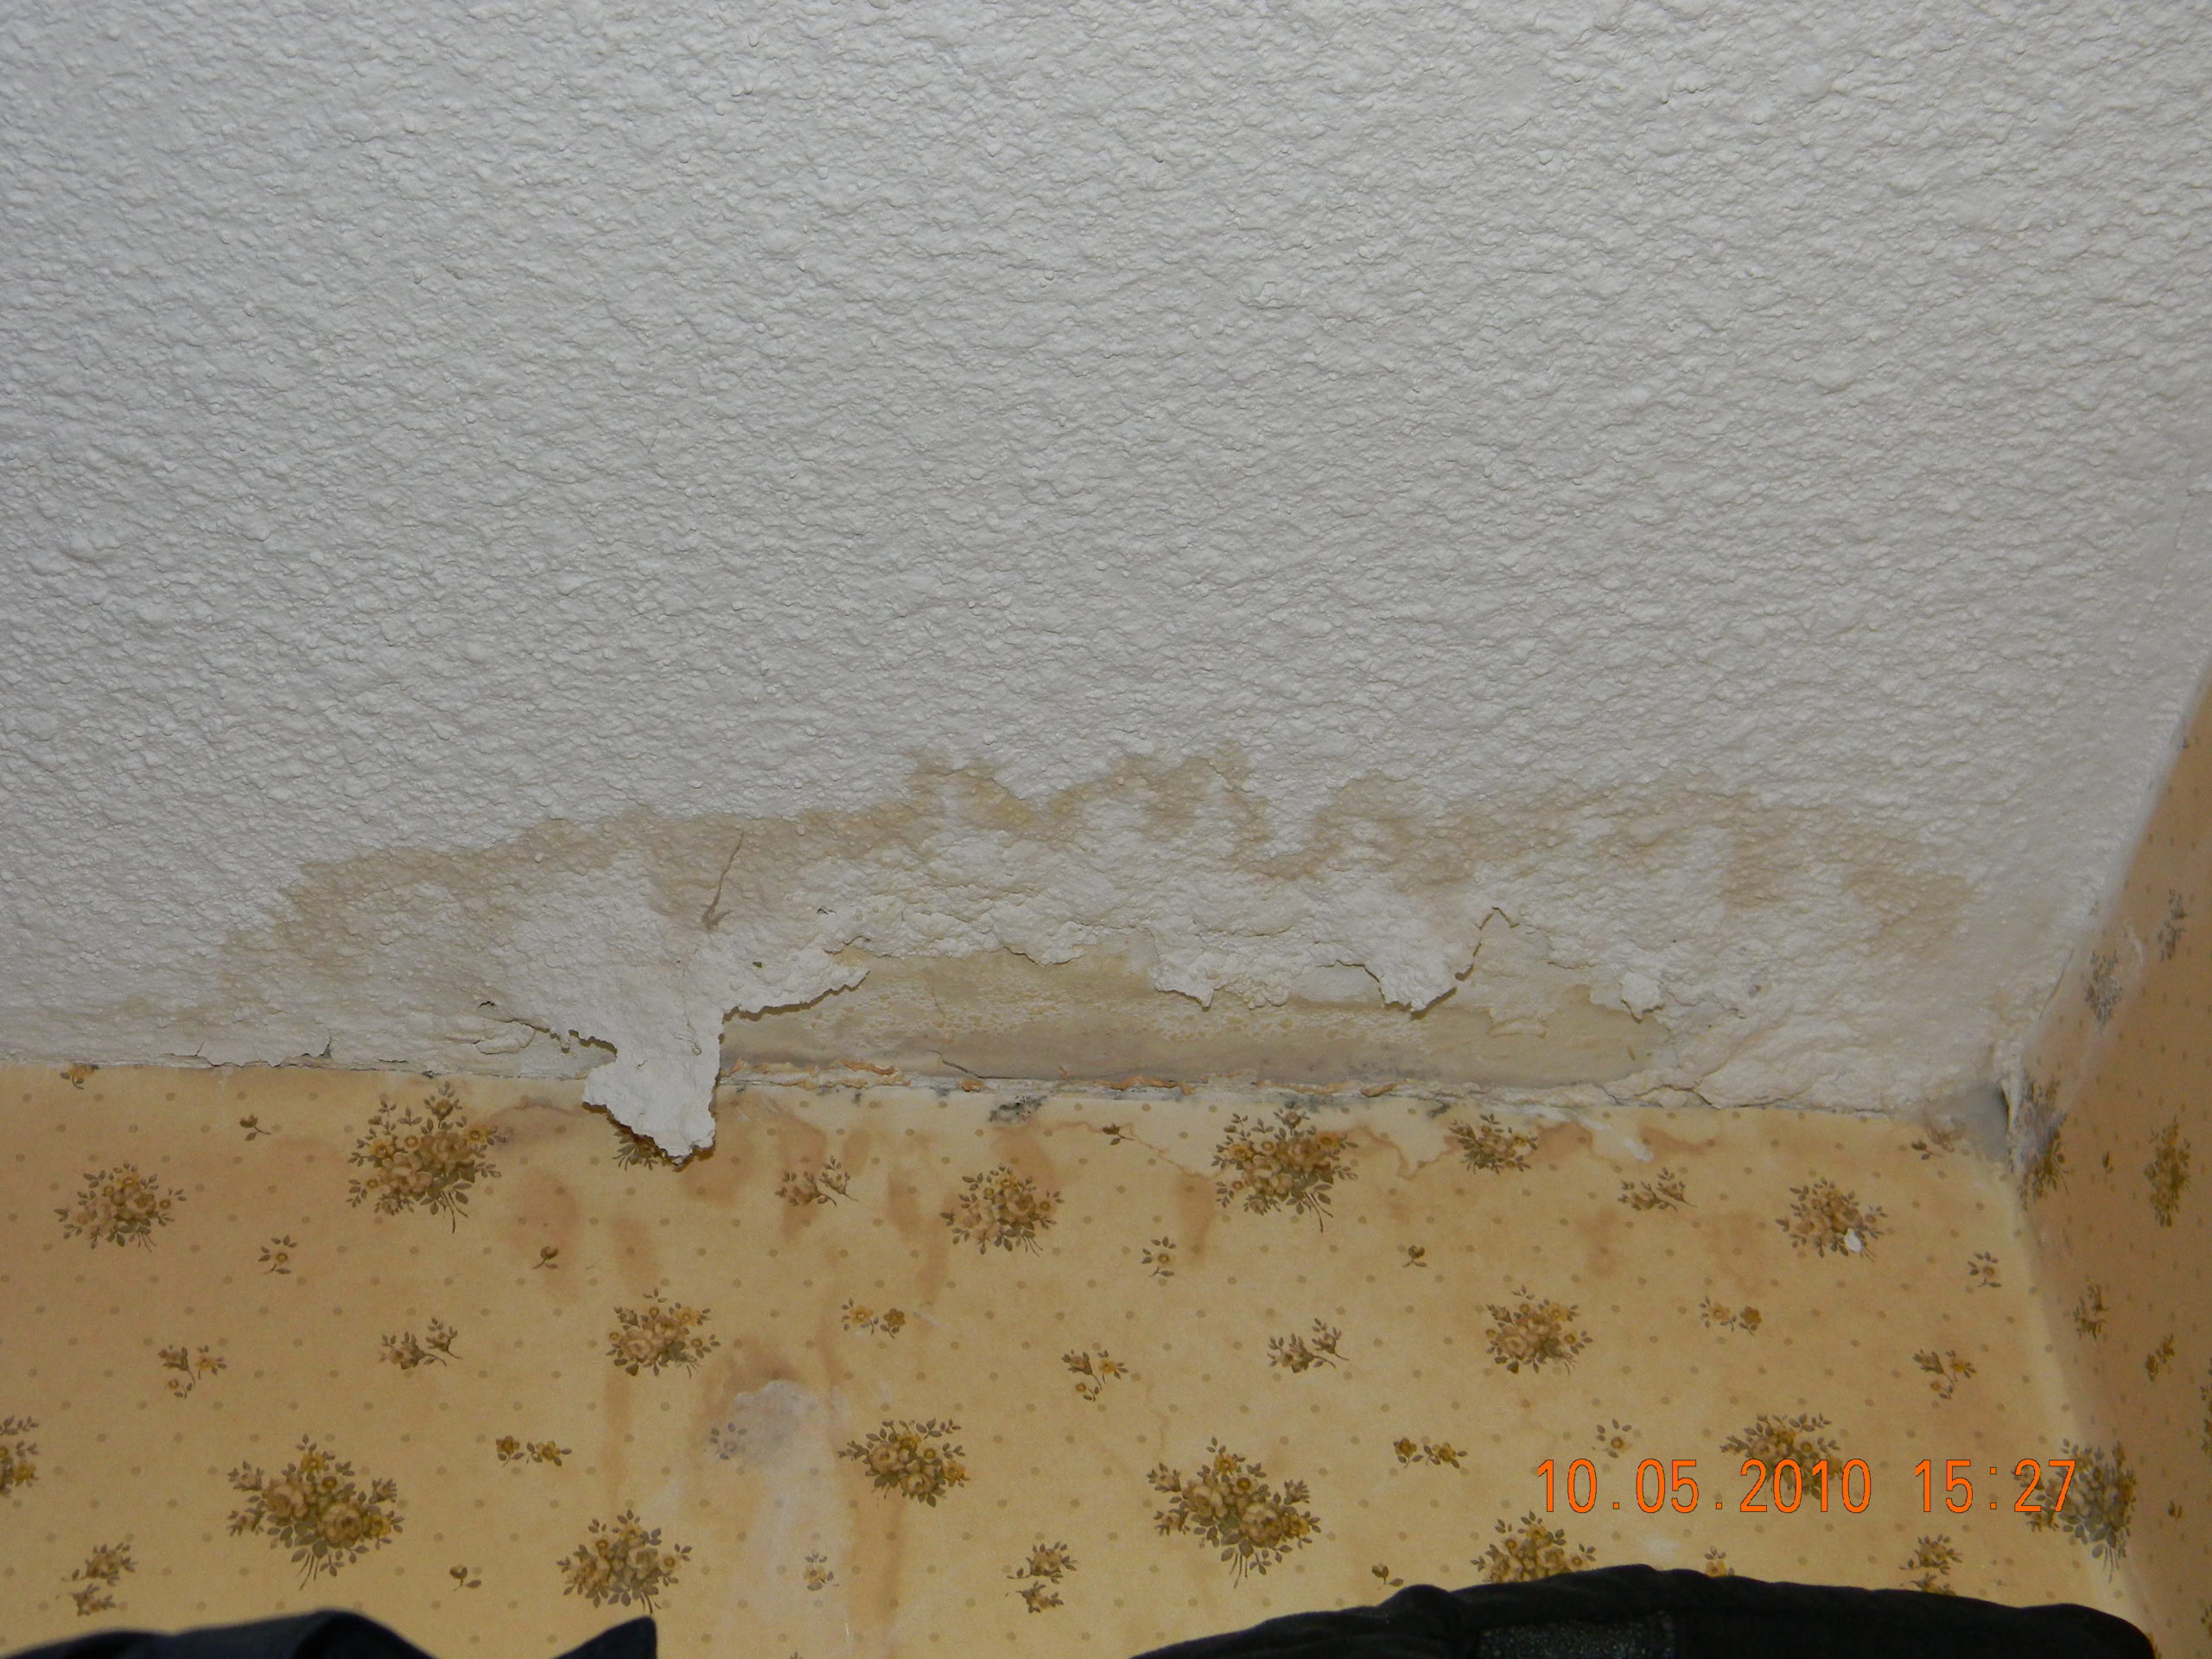 Alarming Wall Water Damage: Look For These 11 Crucial Signs!